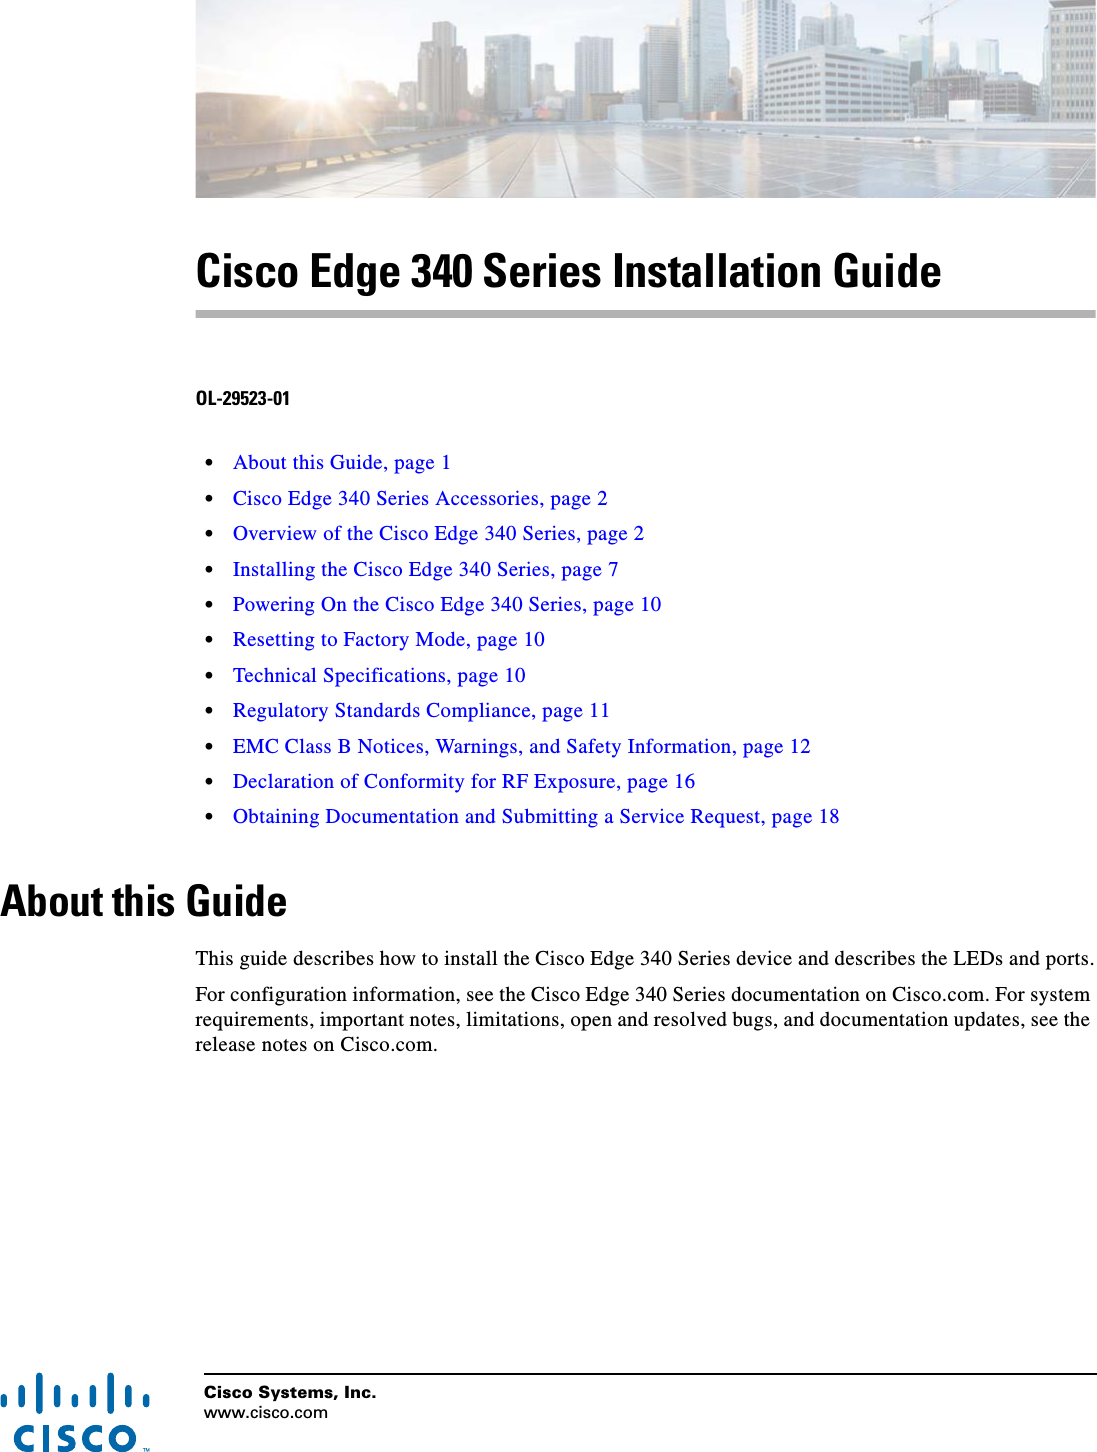 Cisco Systems, Inc.www.cisco.com Cisco Edge 340 Series Installation GuideOL-29523-01  • About this Guide, page 1  • Cisco Edge 340 Series Accessories, page 2  • Overview of the Cisco Edge 340 Series, page 2  • Installing the Cisco Edge 340 Series, page 7  • Powering On the Cisco Edge 340 Series, page 10  • Resetting to Factory Mode, page 10  • Technical Specifications, page 10  • Regulatory Standards Compliance, page 11  • EMC Class B Notices, Warnings, and Safety Information, page 12  • Declaration of Conformity for RF Exposure, page 16  • Obtaining Documentation and Submitting a Service Request, page 18About this GuideThis guide describes how to install the Cisco Edge 340 Series device and describes the LEDs and ports.For configuration information, see the Cisco Edge 340 Series documentation on Cisco.com. For system requirements, important notes, limitations, open and resolved bugs, and documentation updates, see the release notes on Cisco.com.